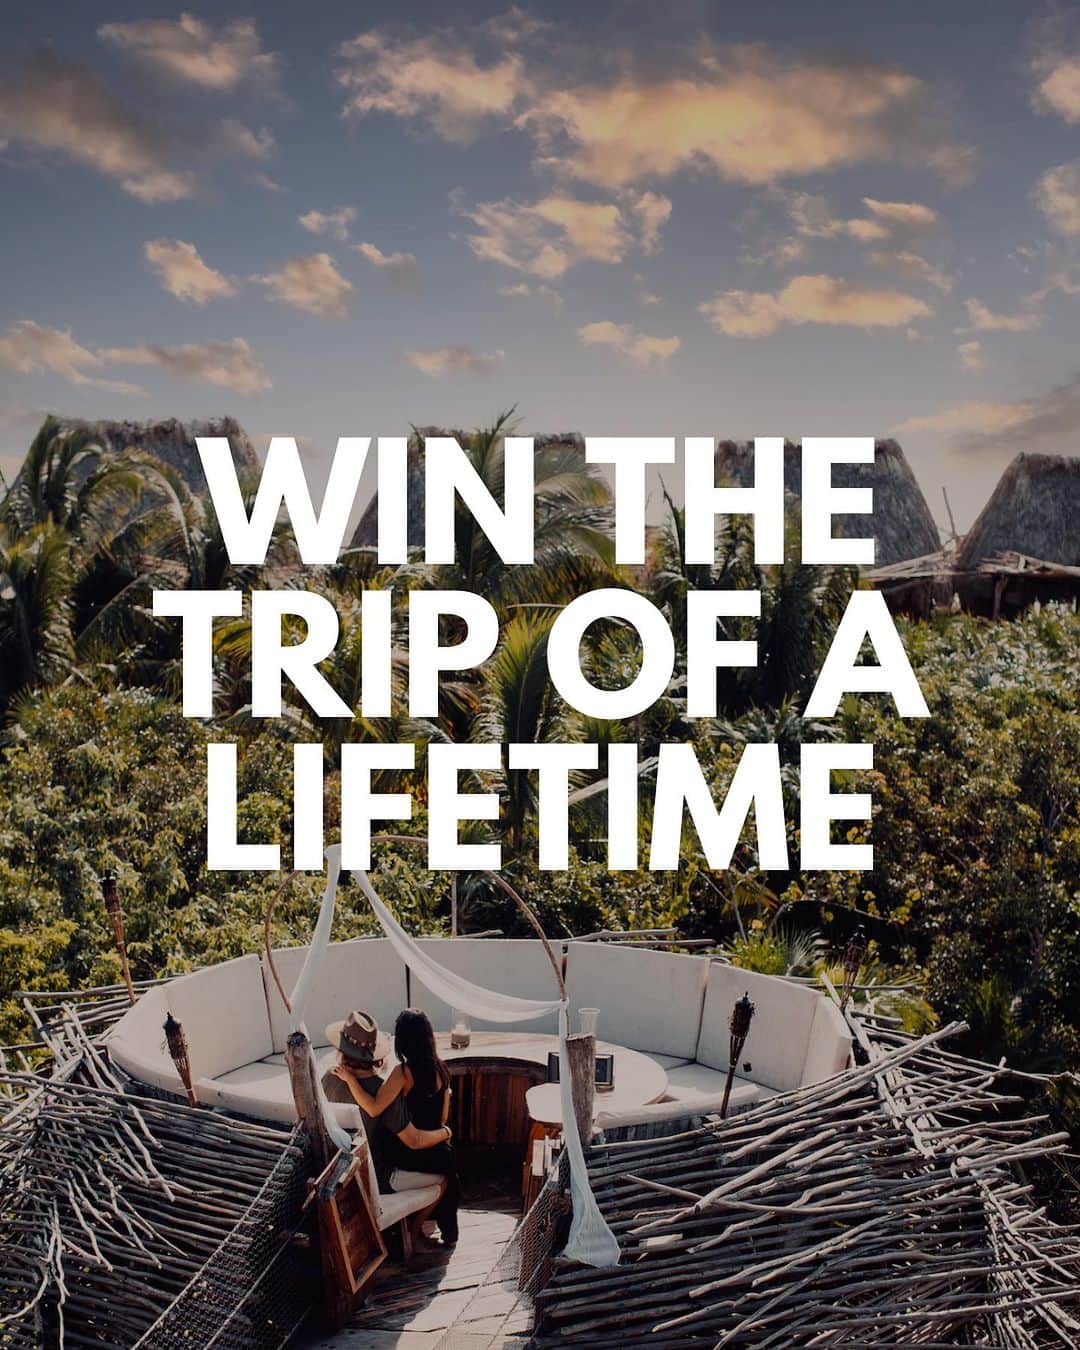 BEAUTIFUL DESTINATIONSのインスタグラム：「DREAM VACATION GIVEAWAY!   @justasklayla and @beautifuldestinations are offering one lucky winner and their friend a luxurious 5-night stay at one-of-a-kind @azulik in Tulum, Mexico, with flights included!  For a chance to win, follow these steps:  1) Follow @justasklayla, @beautifuldestinations and @azulik 2) Download app in bio of @justasklayla and ask: Where should I go if I love *insert your favorite place* 3) Comment one location Layla suggests and tag a friend (unlimited entries!) 4) Share this post to your story for an additional entry  Competition closes 2PM EST on Friday 15th December.   The lucky winner will be chosen from Layla’s DMs and this post, then contacted by @beautifuldestinations. Good luck!  Full T&Cs apply and by entering you accept them. Click the link in @justasklayla’s bio to view them.」